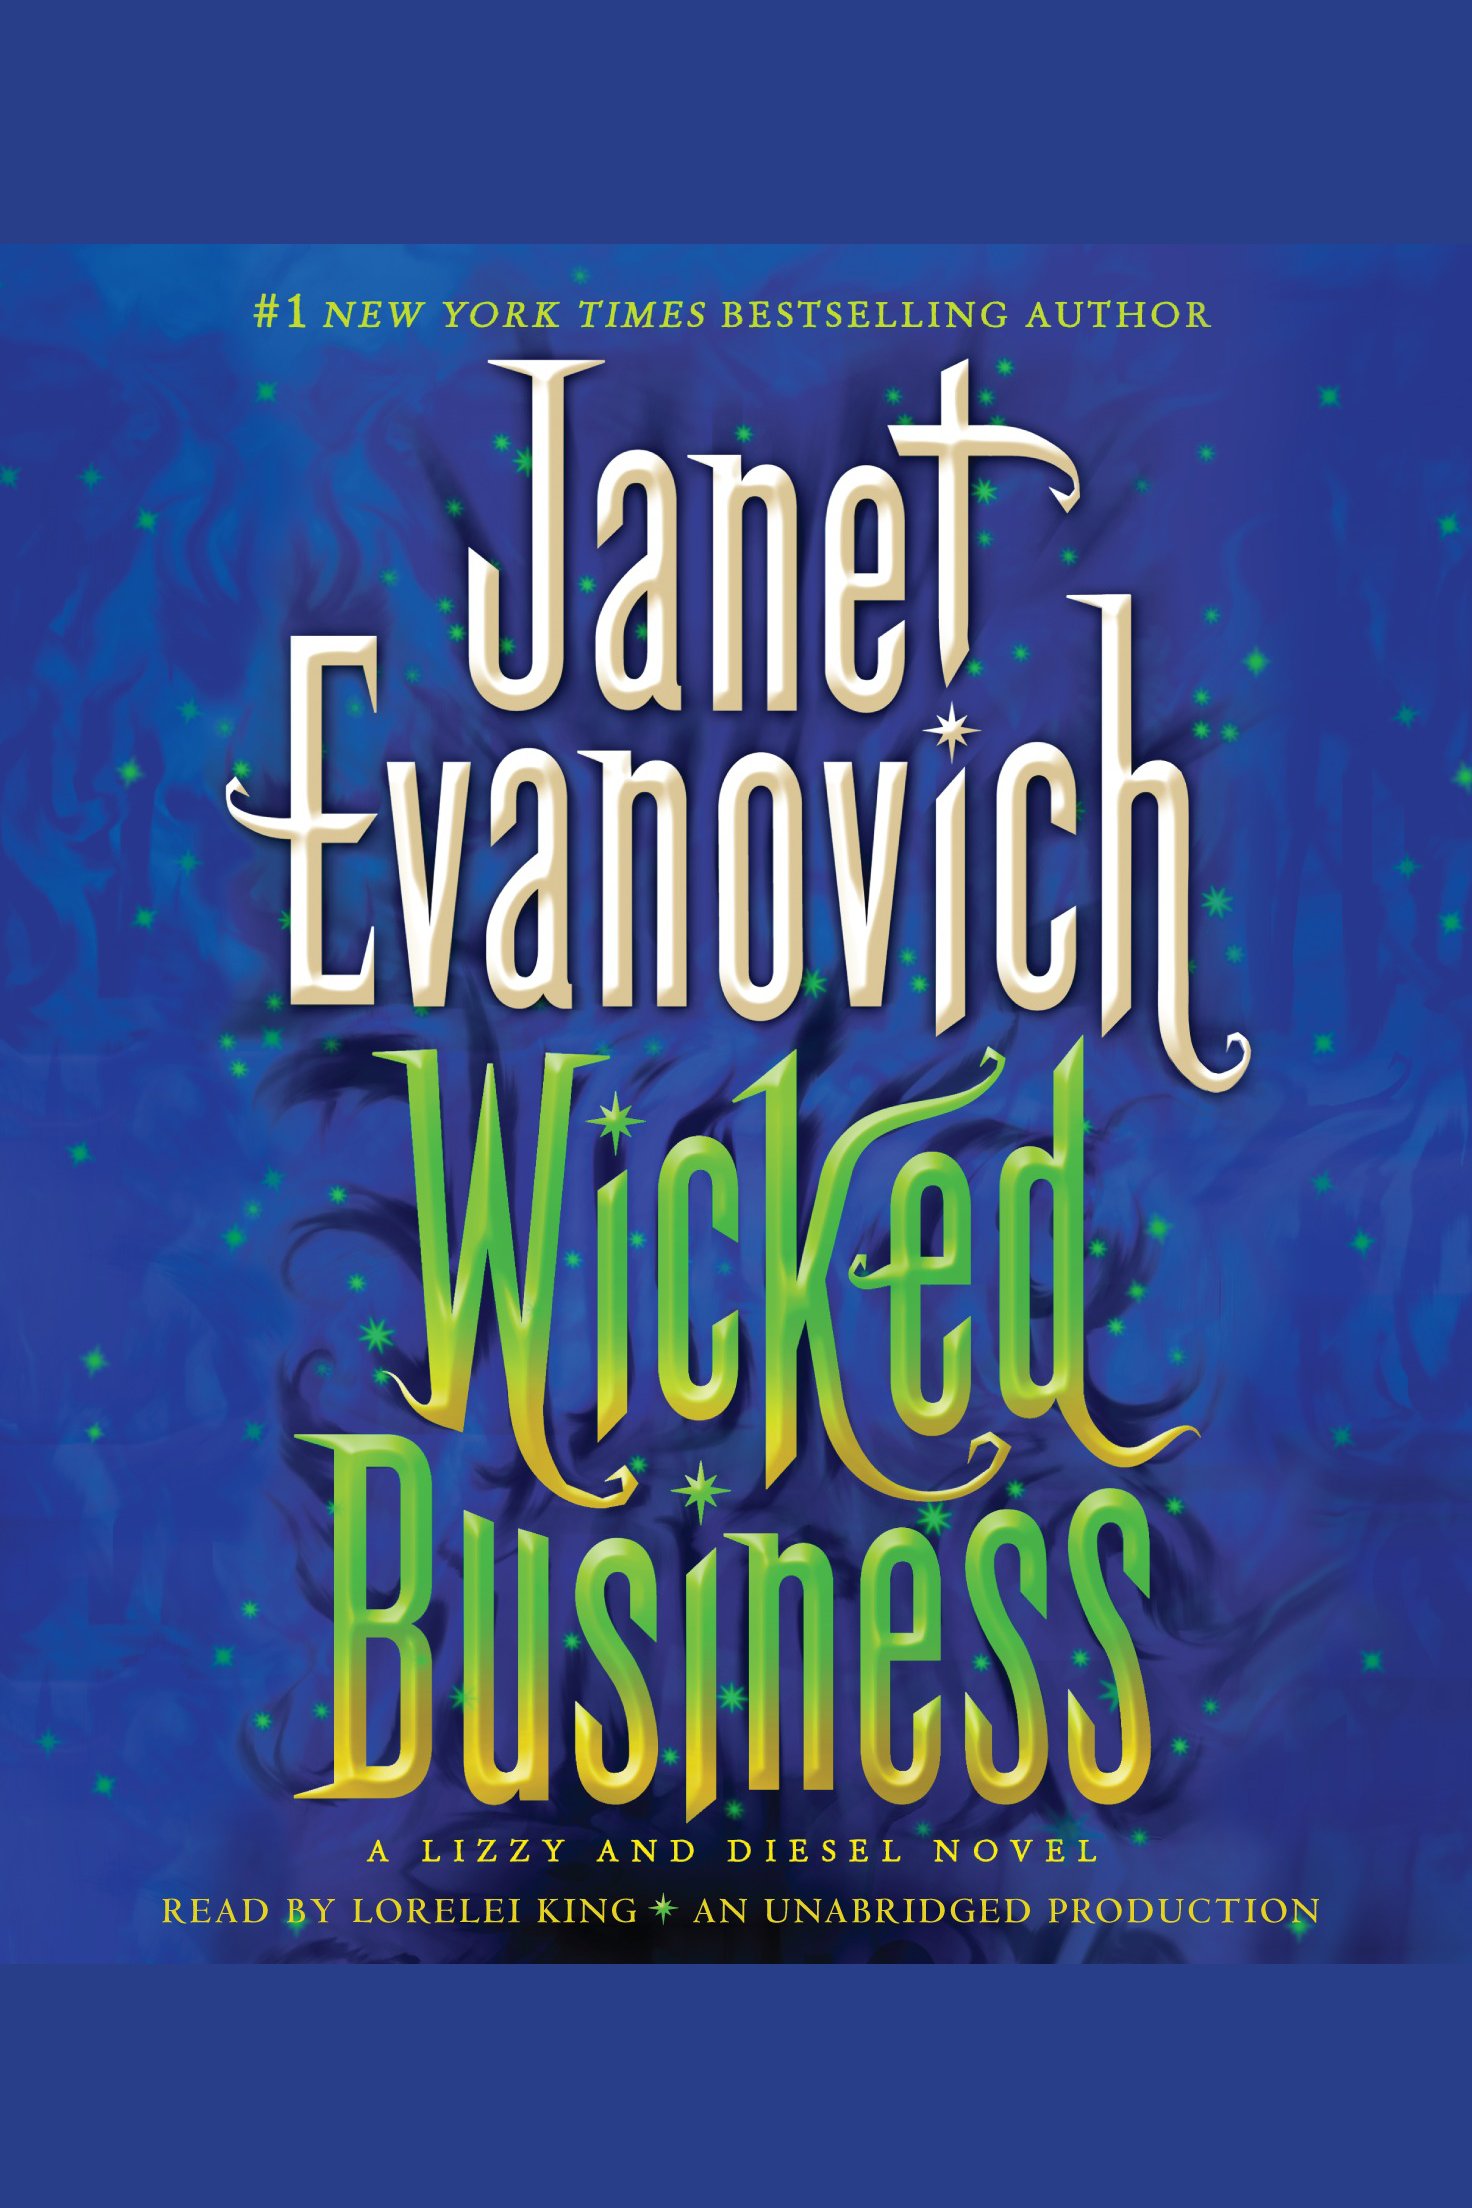 Wicked business cover image